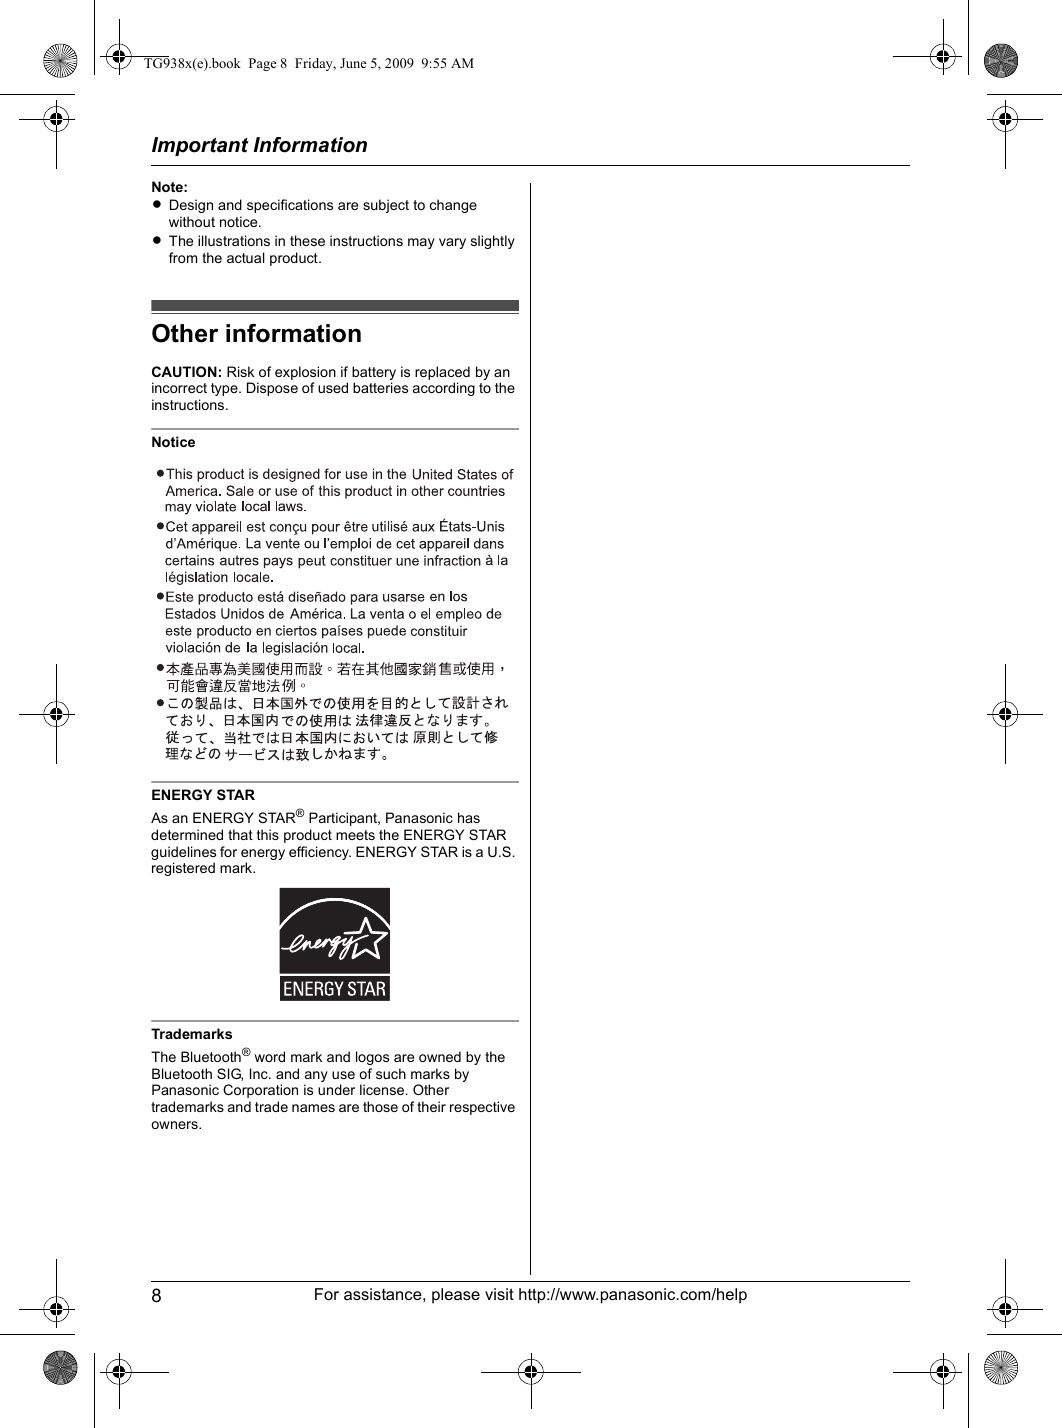 Important Information8For assistance, please visit http://www.panasonic.com/helpNote:LDesign and specifications are subject to change without notice.LThe illustrations in these instructions may vary slightly from the actual product.Other informationCAUTION: Risk of explosion if battery is replaced by an incorrect type. Dispose of used batteries according to the instructions.NoticeENERGY STARAs an ENERGY STAR® Participant, Panasonic has determined that this product meets the ENERGY STAR guidelines for energy efficiency. ENERGY STAR is a U.S. registered mark.TrademarksThe Bluetooth® word mark and logos are owned by the Bluetooth SIG, Inc. and any use of such marks by Panasonic Corporation is under license. Other trademarks and trade names are those of their respective owners.TG938x(e).book  Page 8  Friday, June 5, 2009  9:55 AM